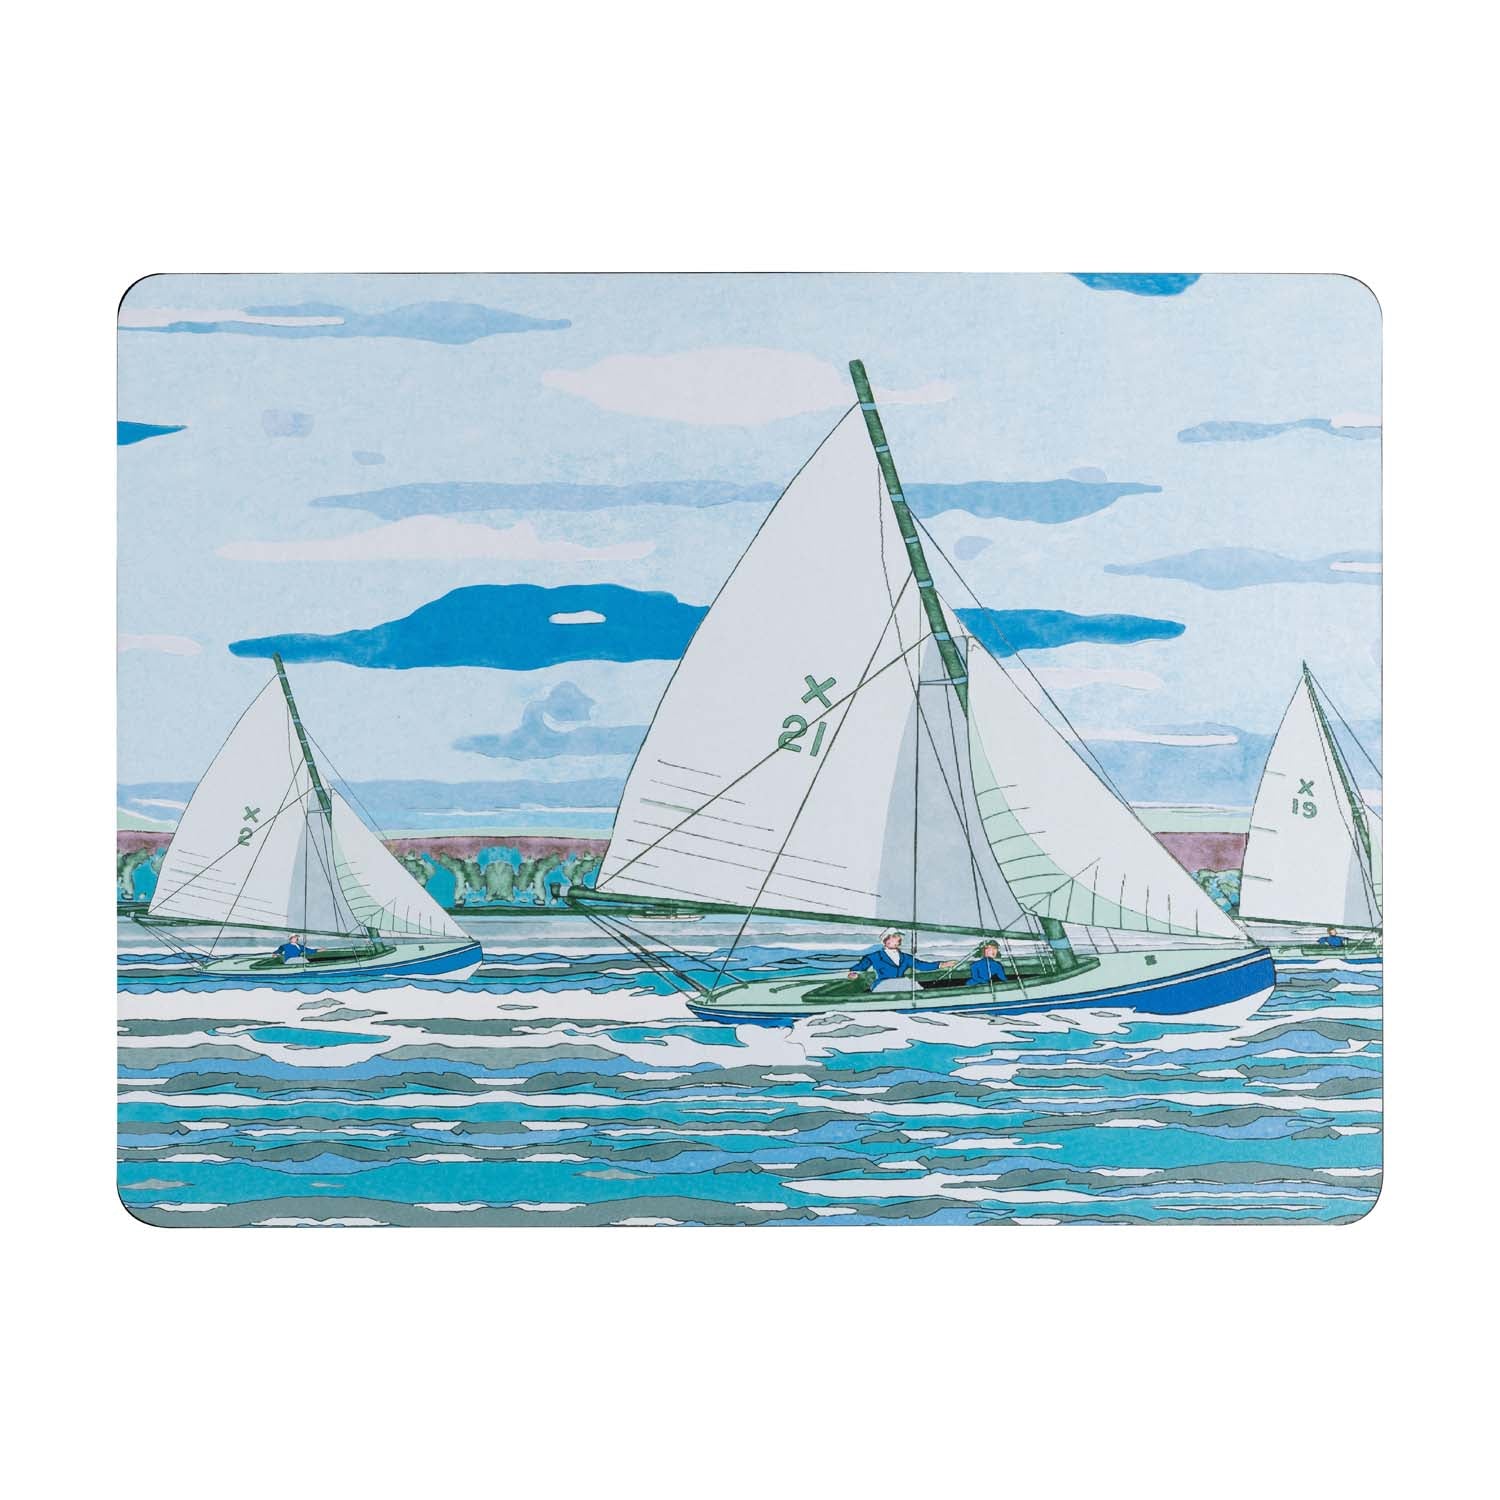 Denby Placemats - Sailing - Set of 6 1 Shaws Department Stores